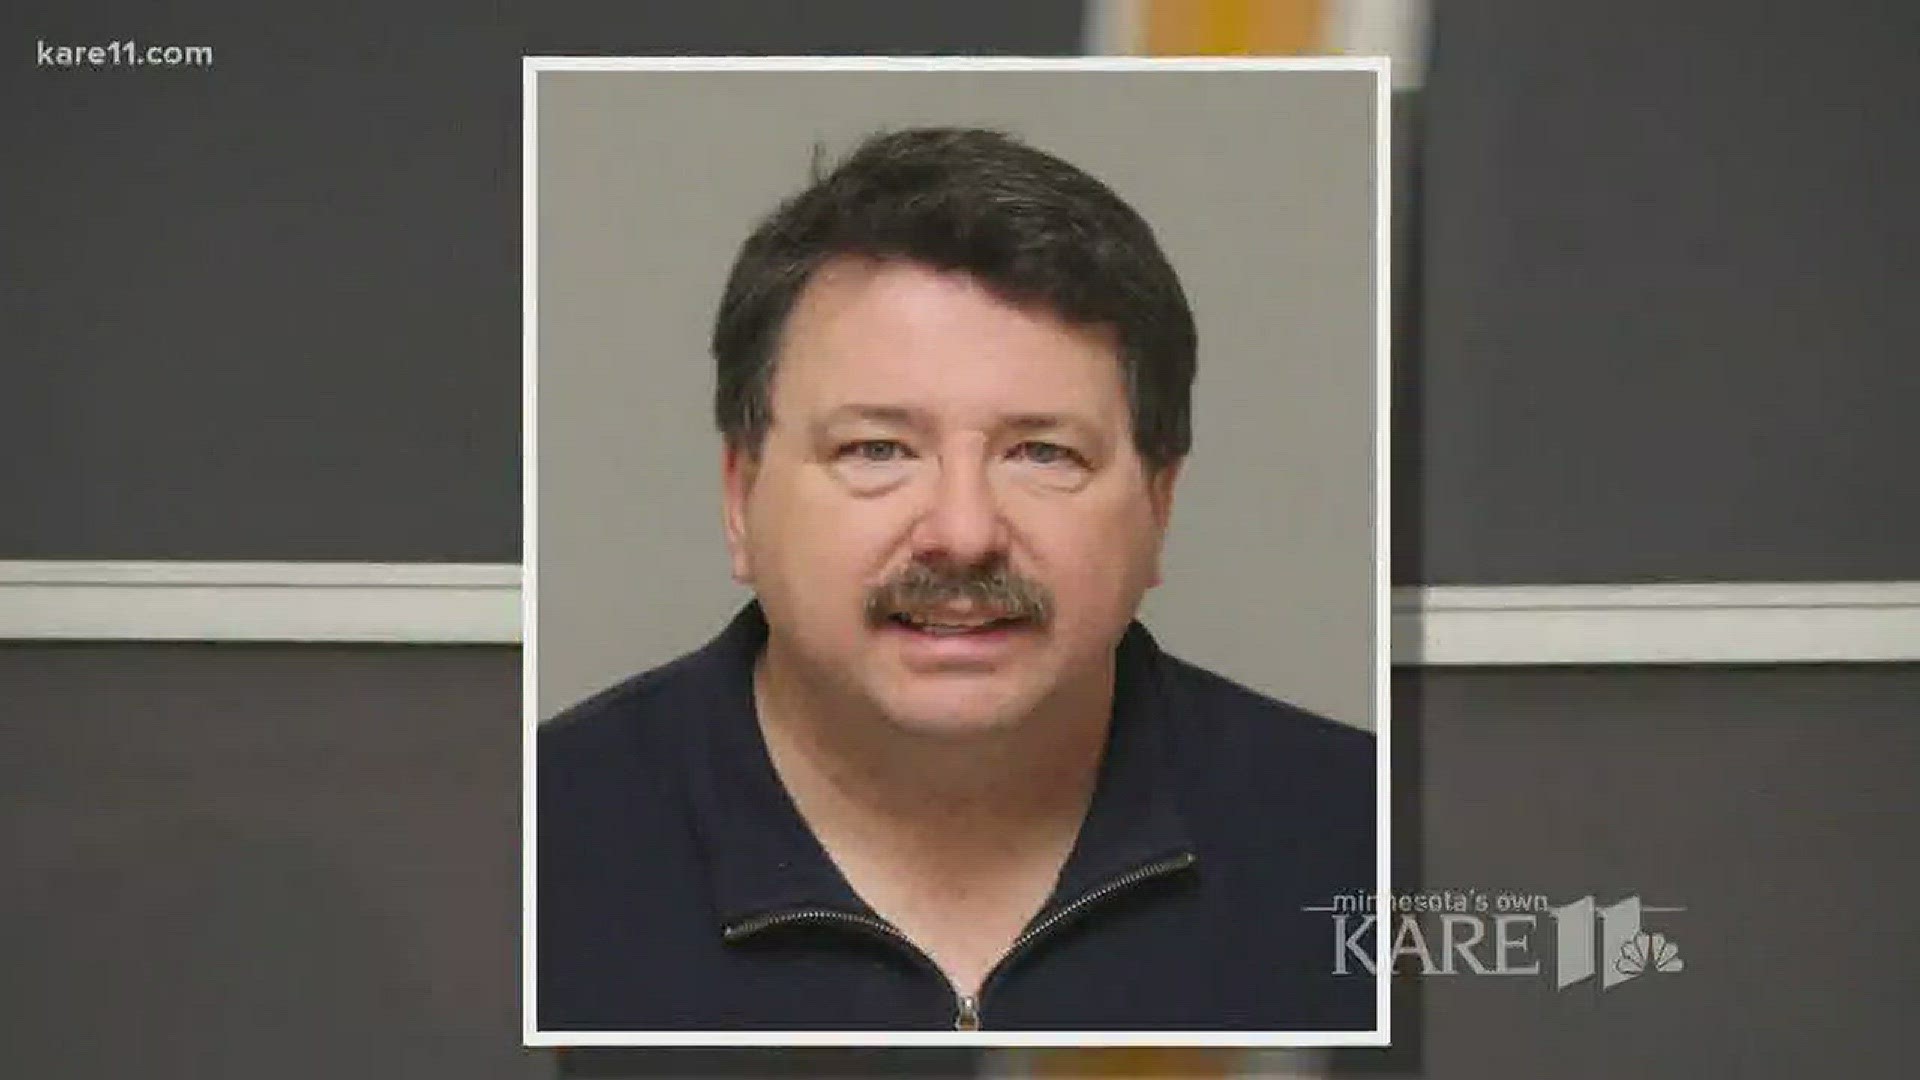 A Minnesota lawmaker is calling on the state legislature to close legal loopholes that allow some admitted child molesters to pass official state background checks - and, in at least one case, drive a school bus for elementary students. http://kare11.tv/2